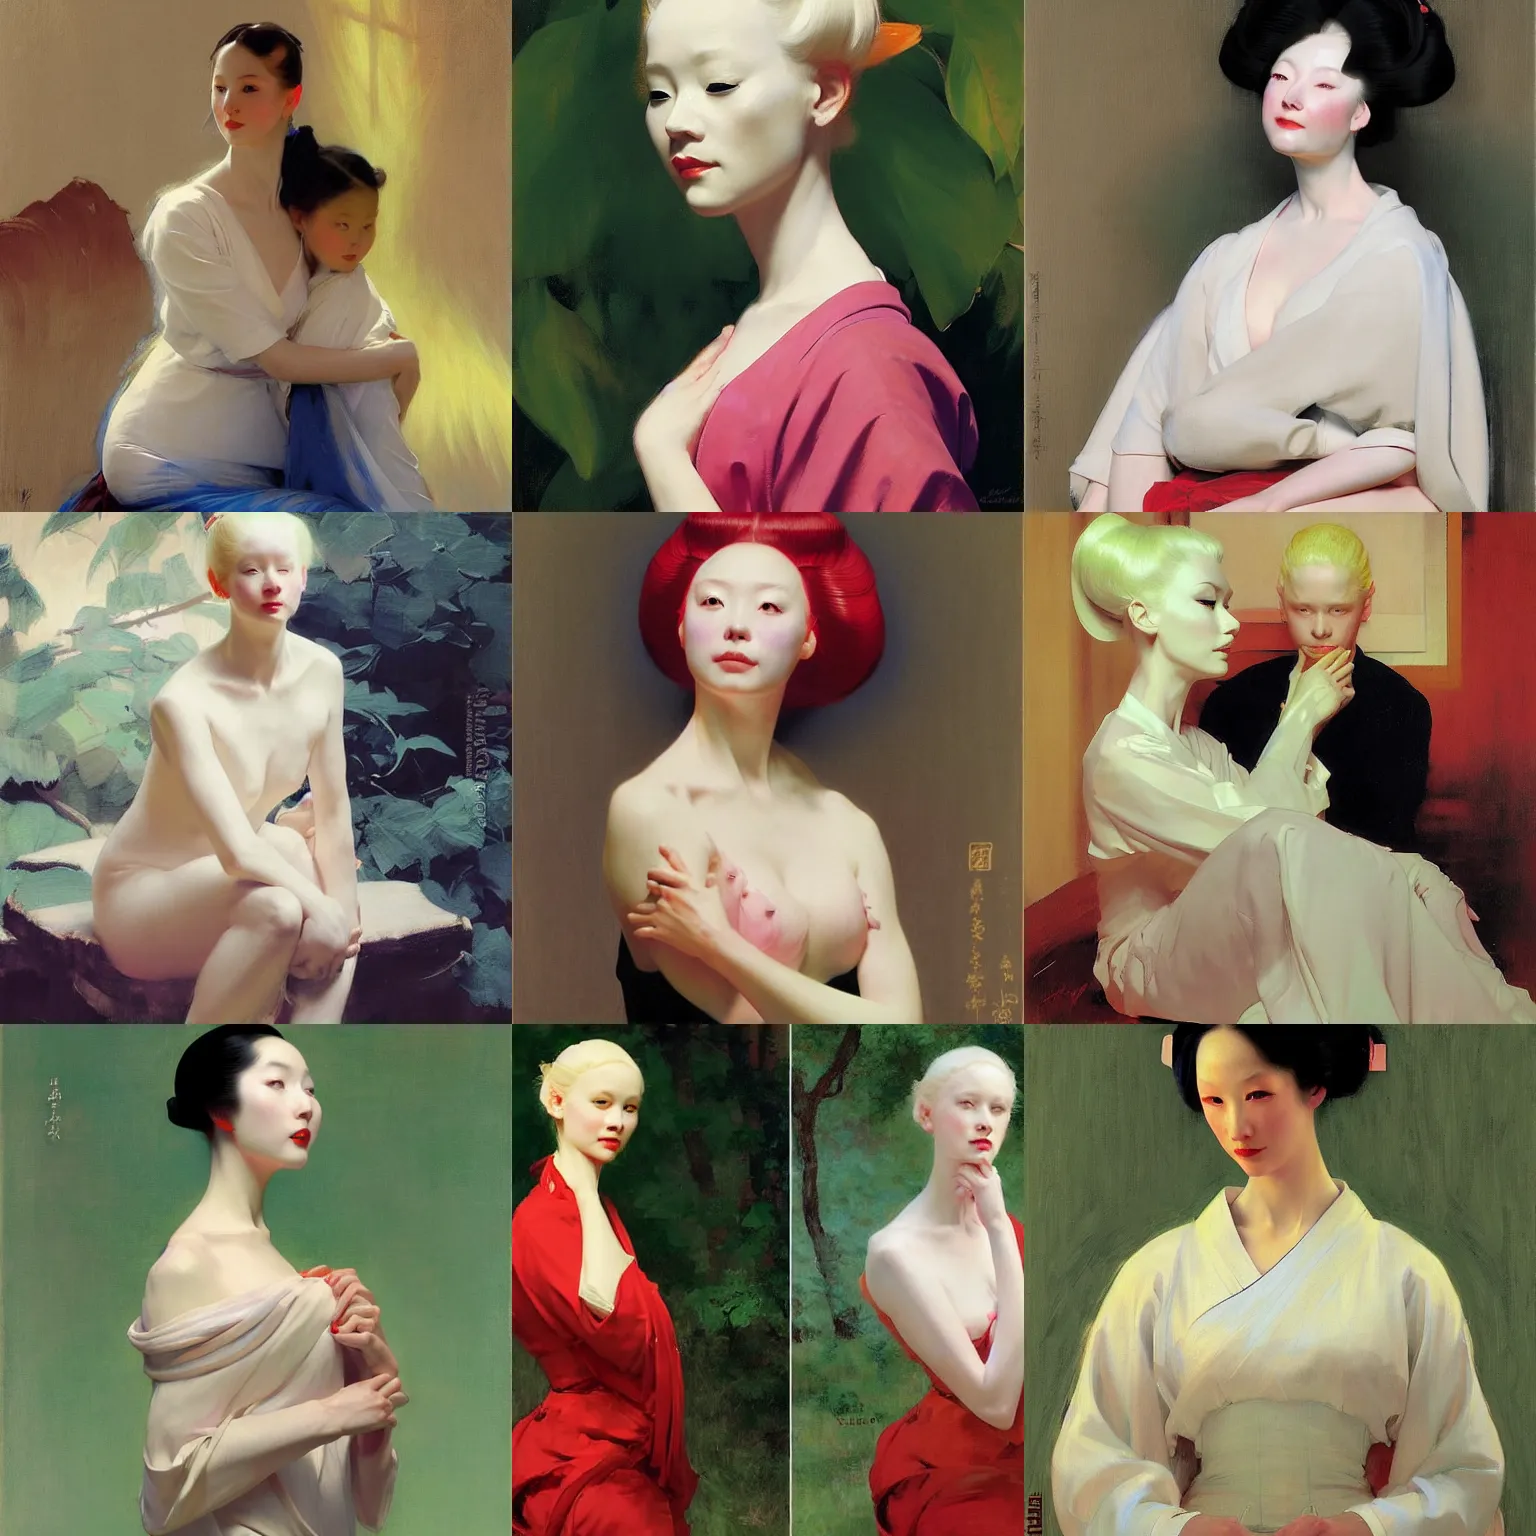 Prompt: yanjun cheng fullbody and portrait of a beautiful albino blonde geisha android by norman rockwell, bouguereau